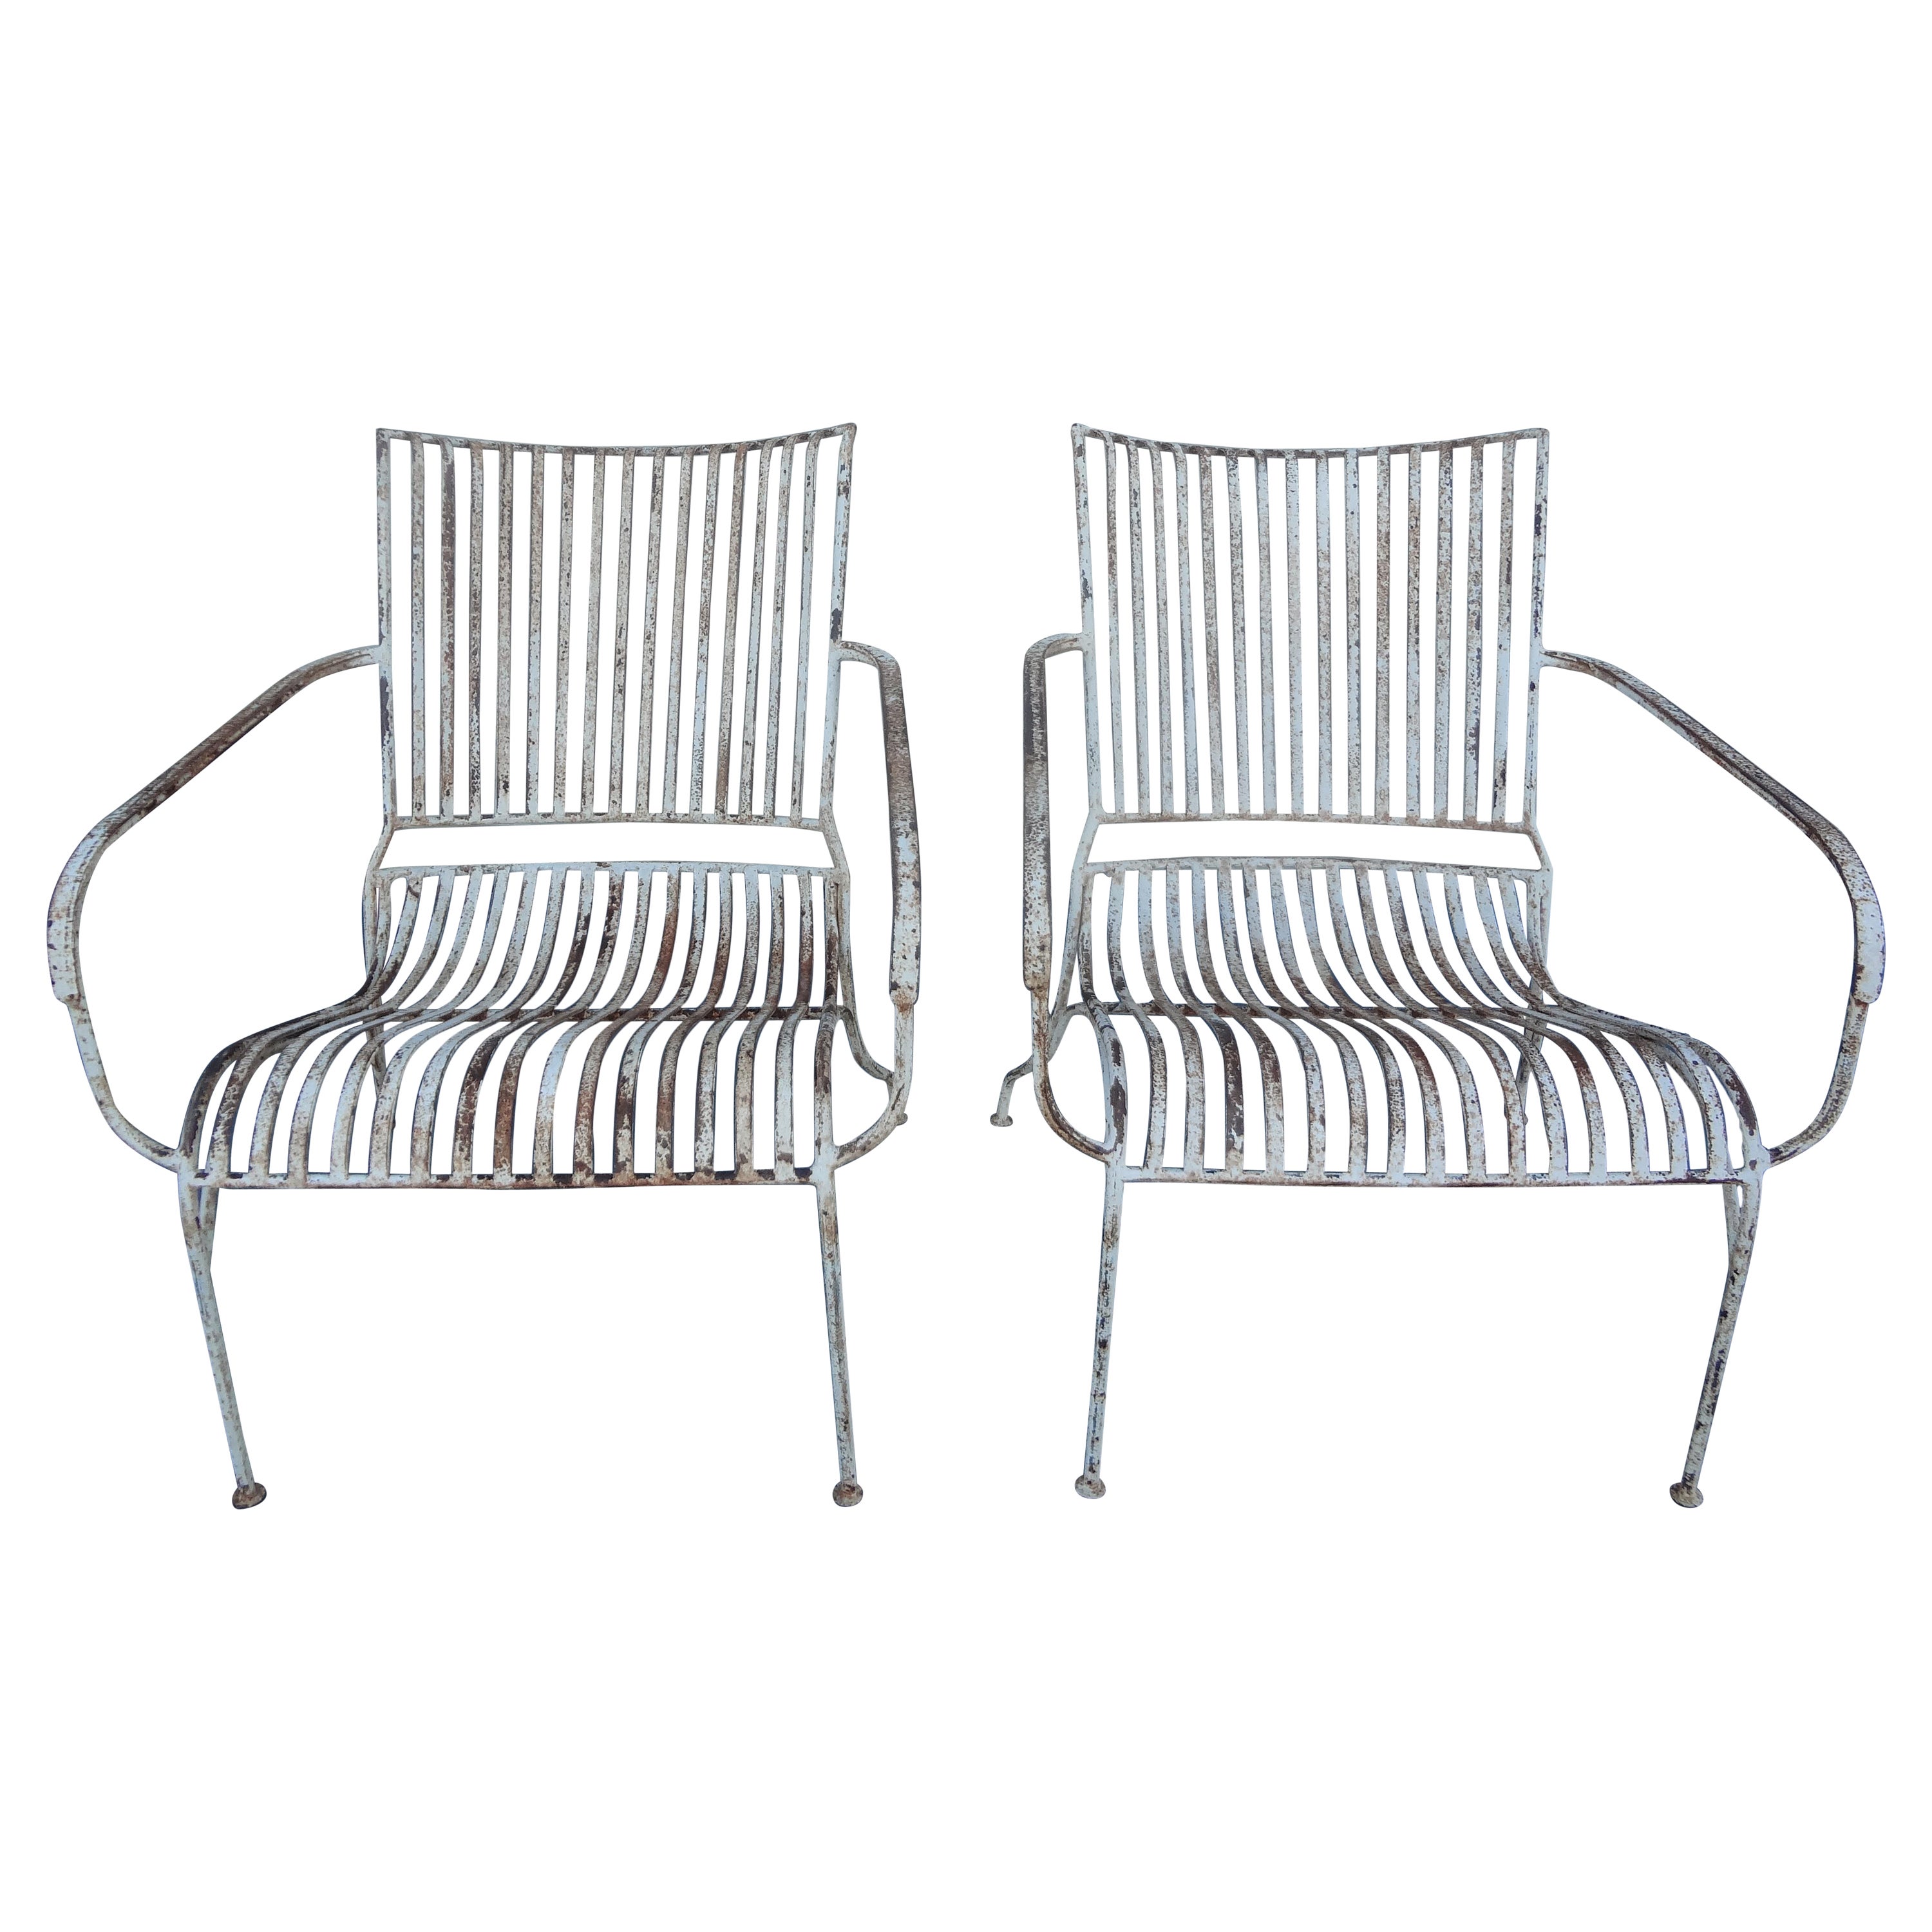 Pair Of French Wrought Iron Garden Chairs